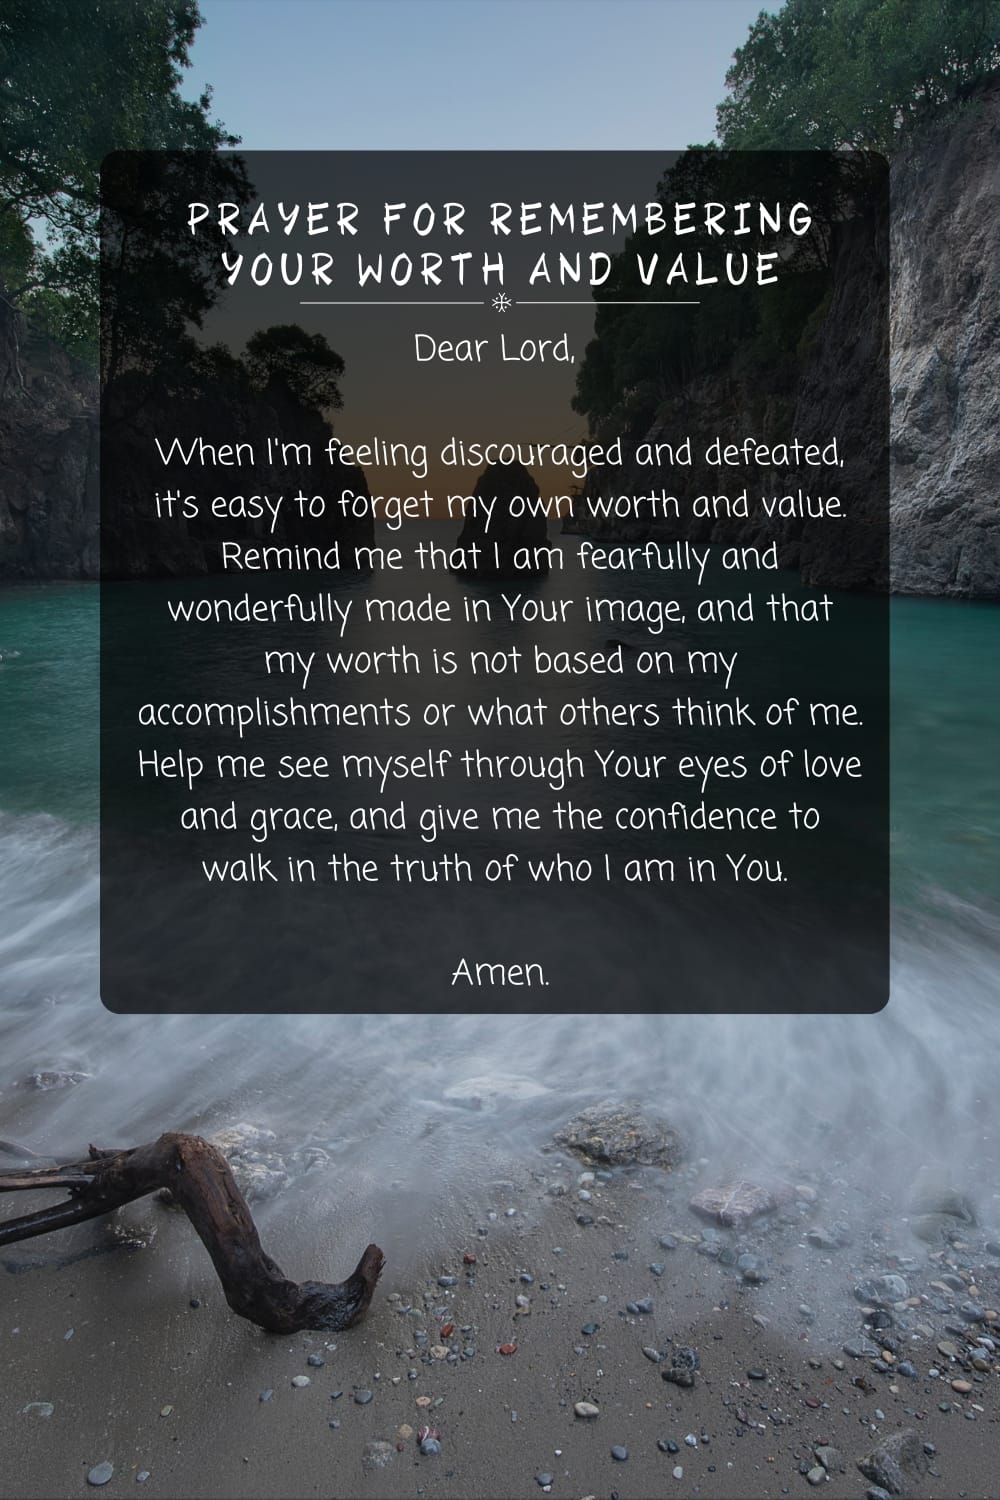 Prayer For Remembering Your Worth and Value